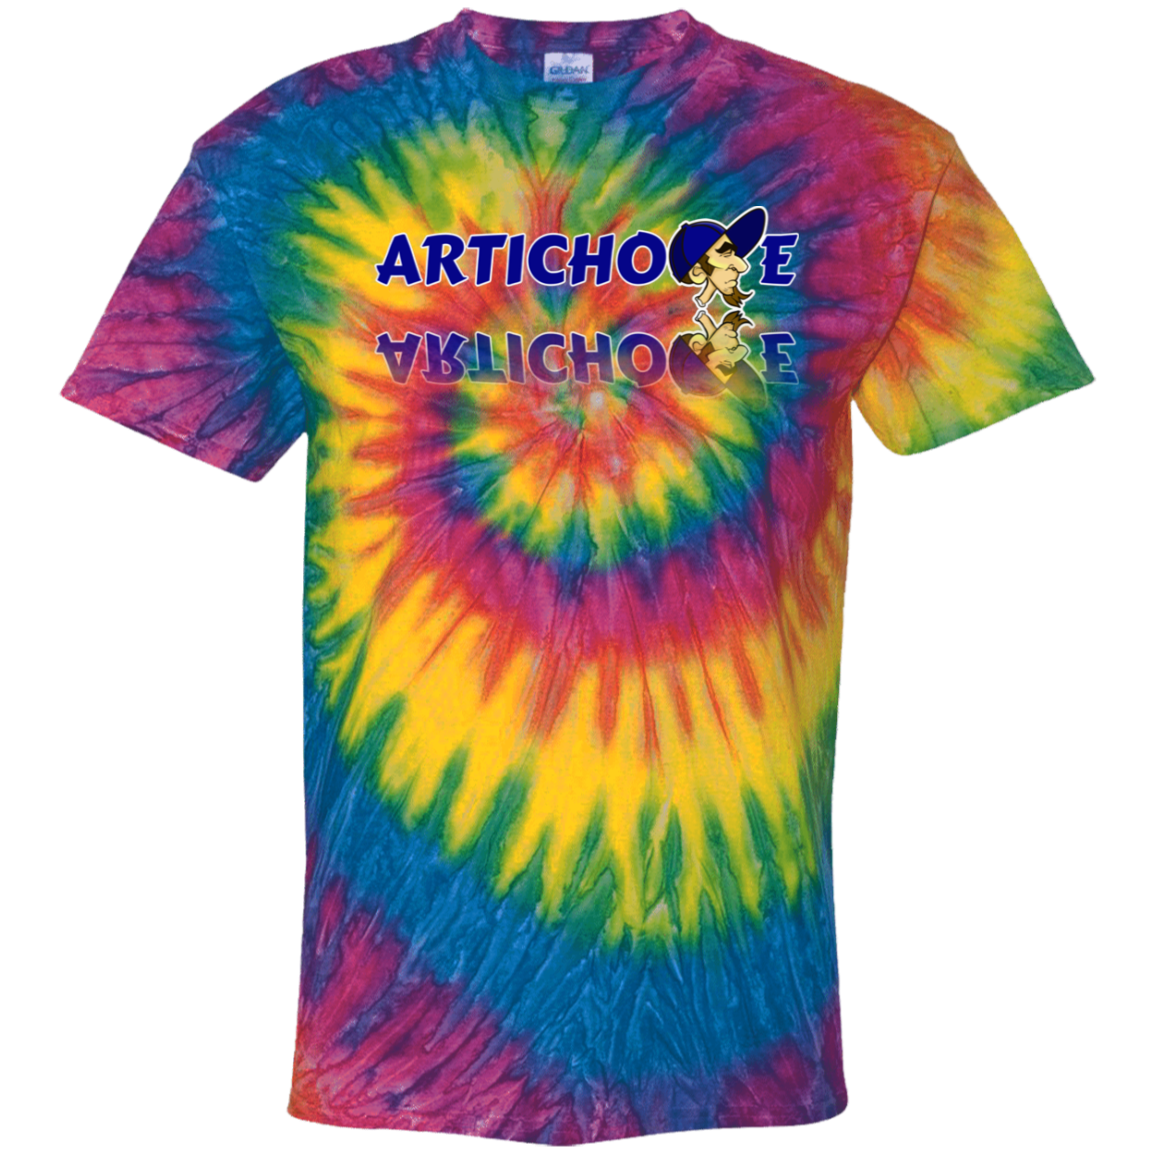 ZZ#20 ArtichokeUSA Characters and Fonts. "Clem" Let’s Create Your Own Design Today. Youth Tie Dye T-Shirt